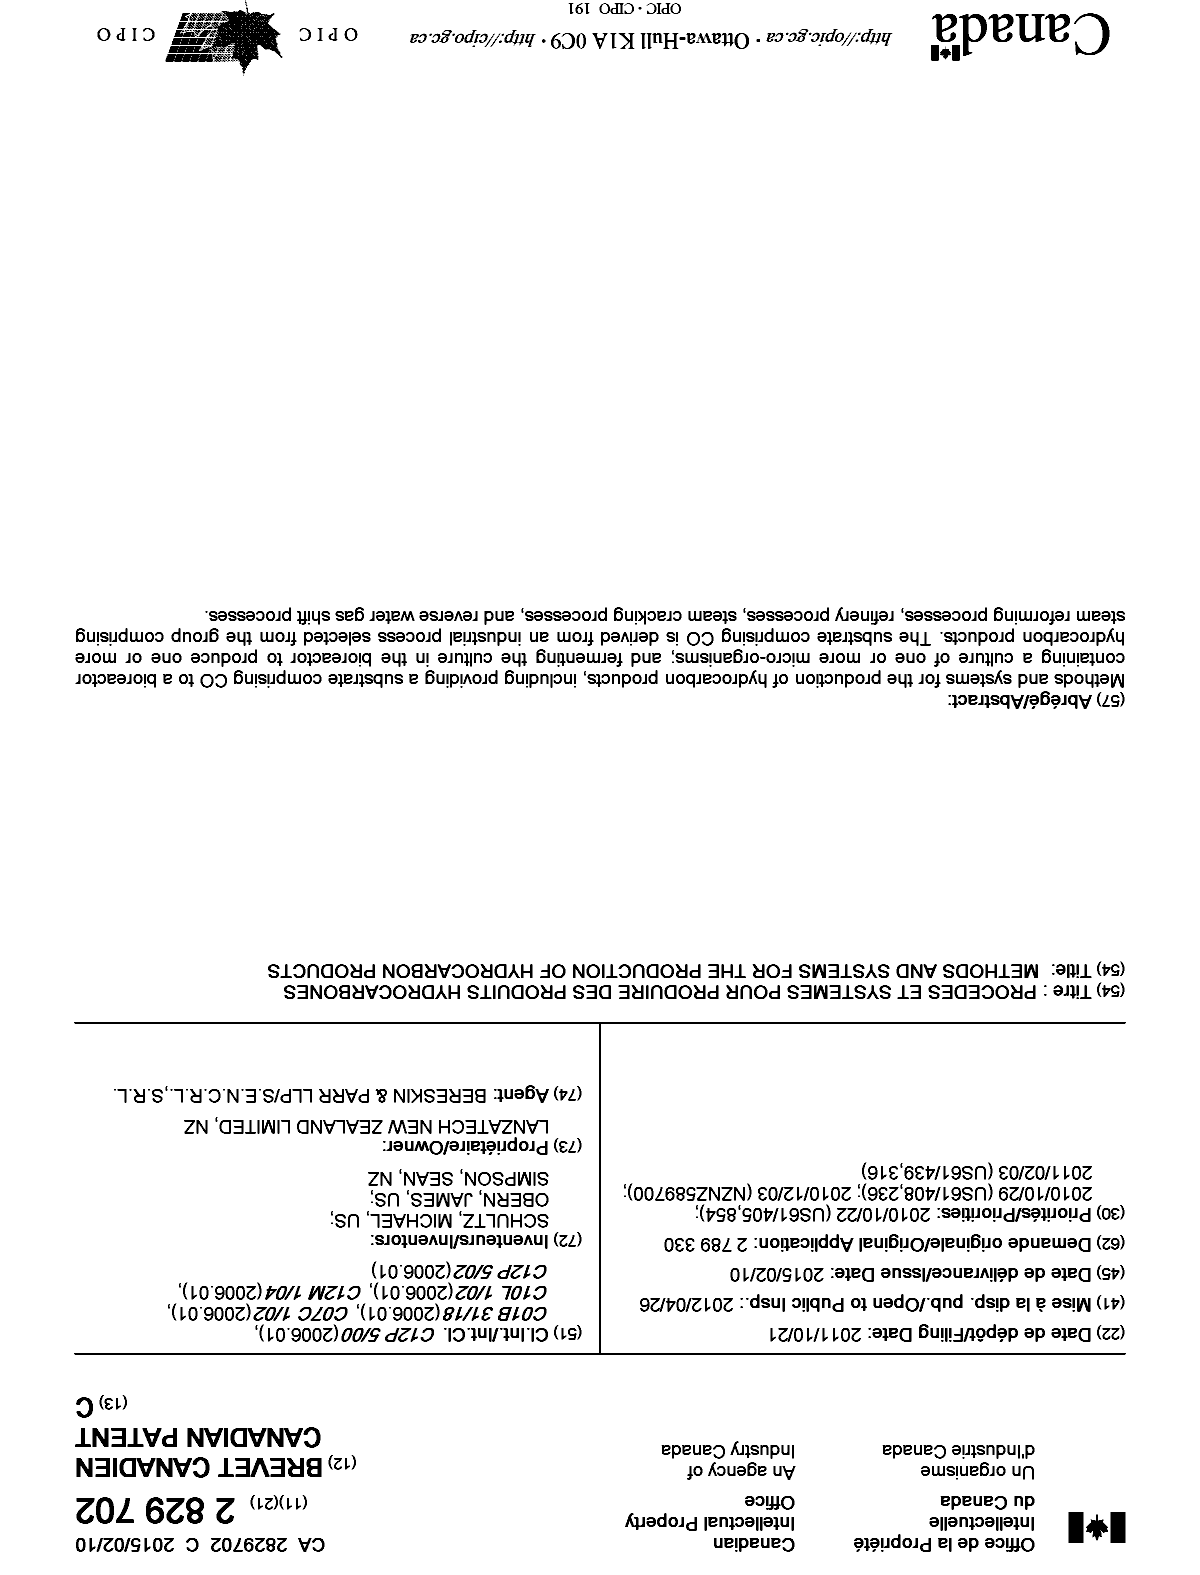 Canadian Patent Document 2829702. Cover Page 20141228. Image 1 of 1